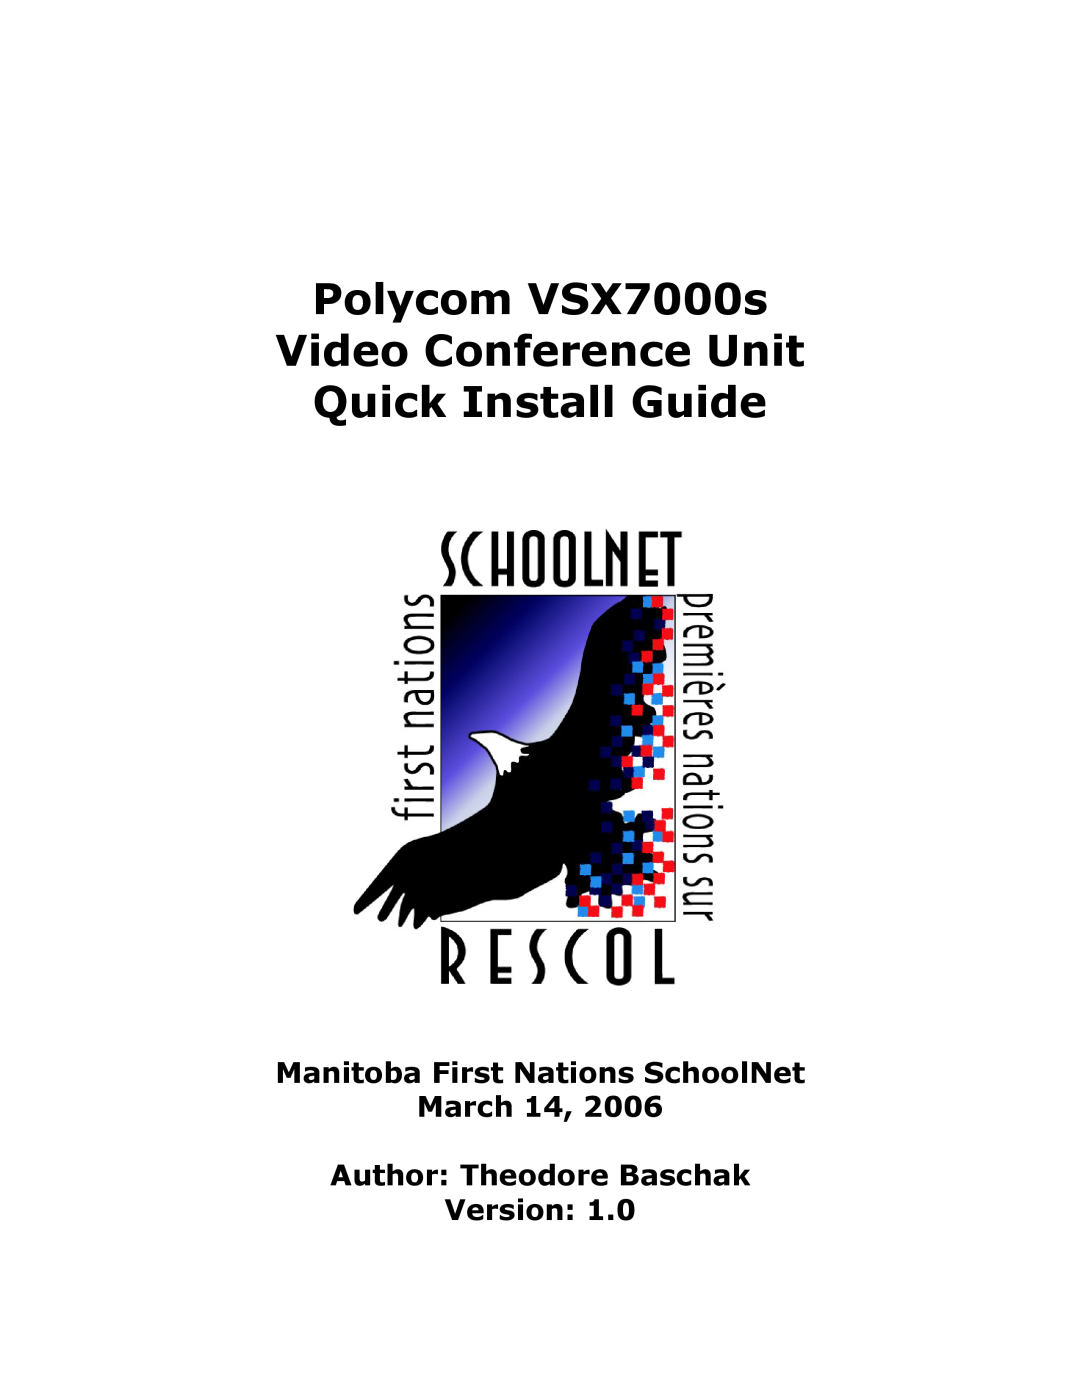 Polycom VSX7000s manual Manitoba First Nations SchoolNet March 14 Author Theodore Baschak, Version 